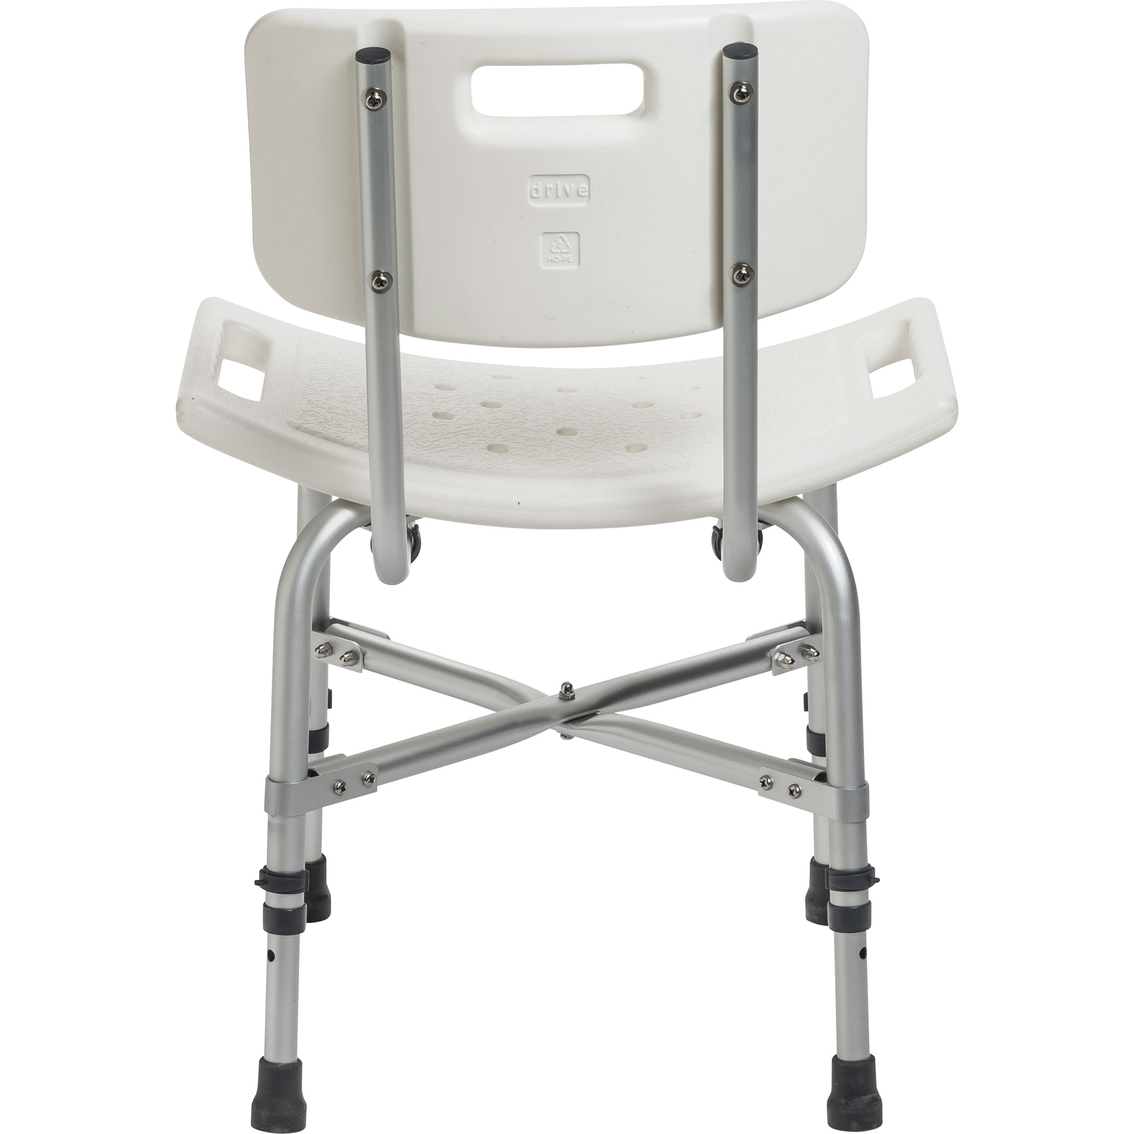 Drive Medical Bariatric Heavy Duty Bath Bench with Backrest - Image 3 of 4